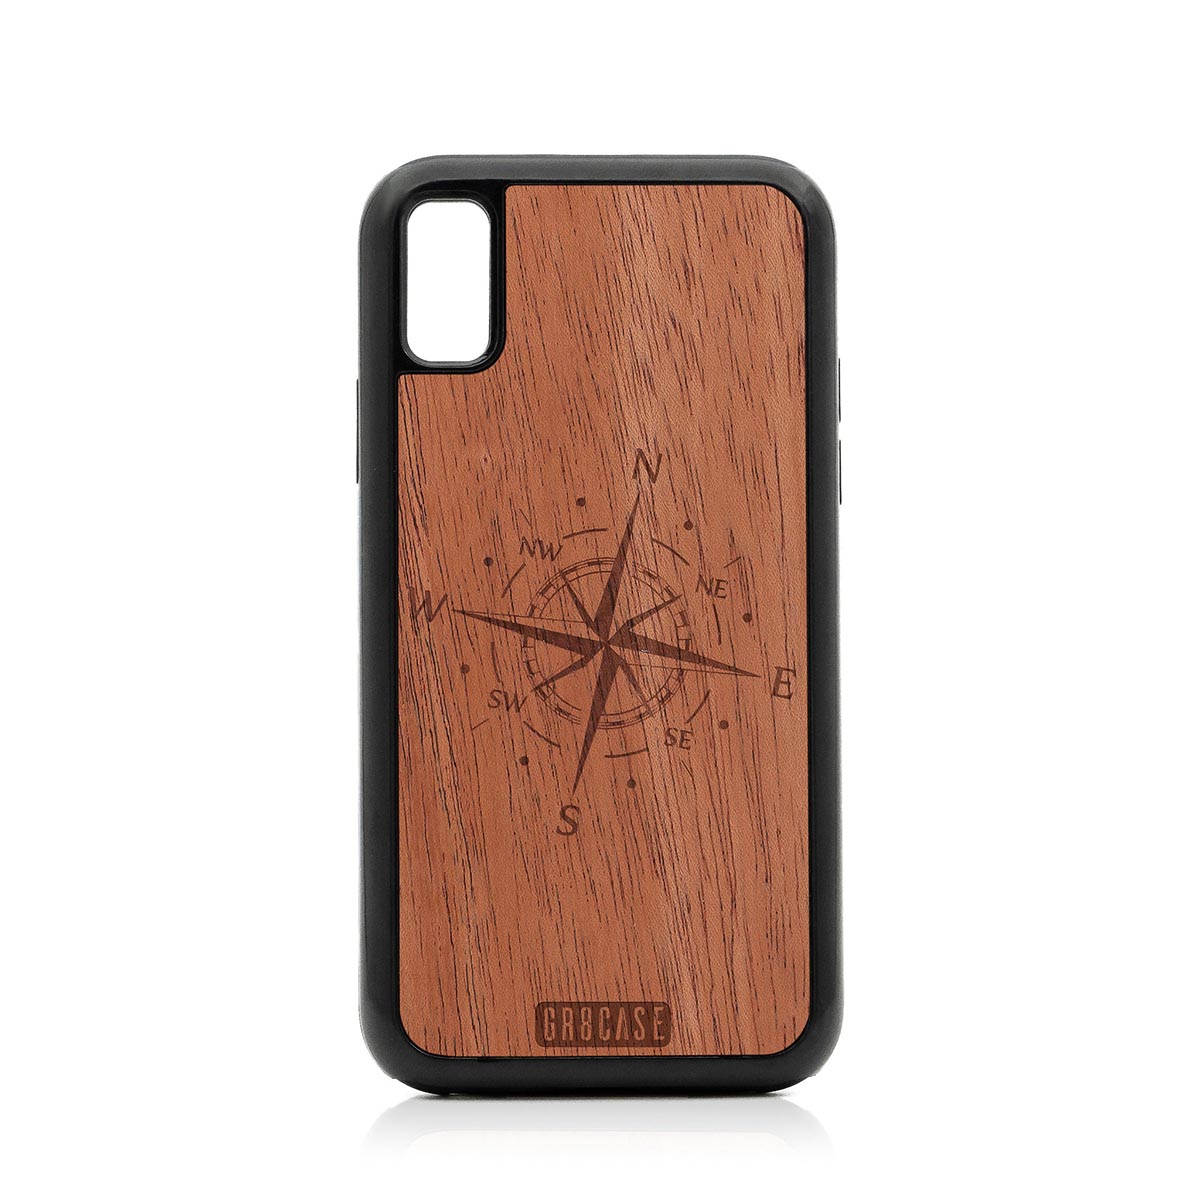 Compass Design Wood Case For iPhone X/XS by GR8CASE